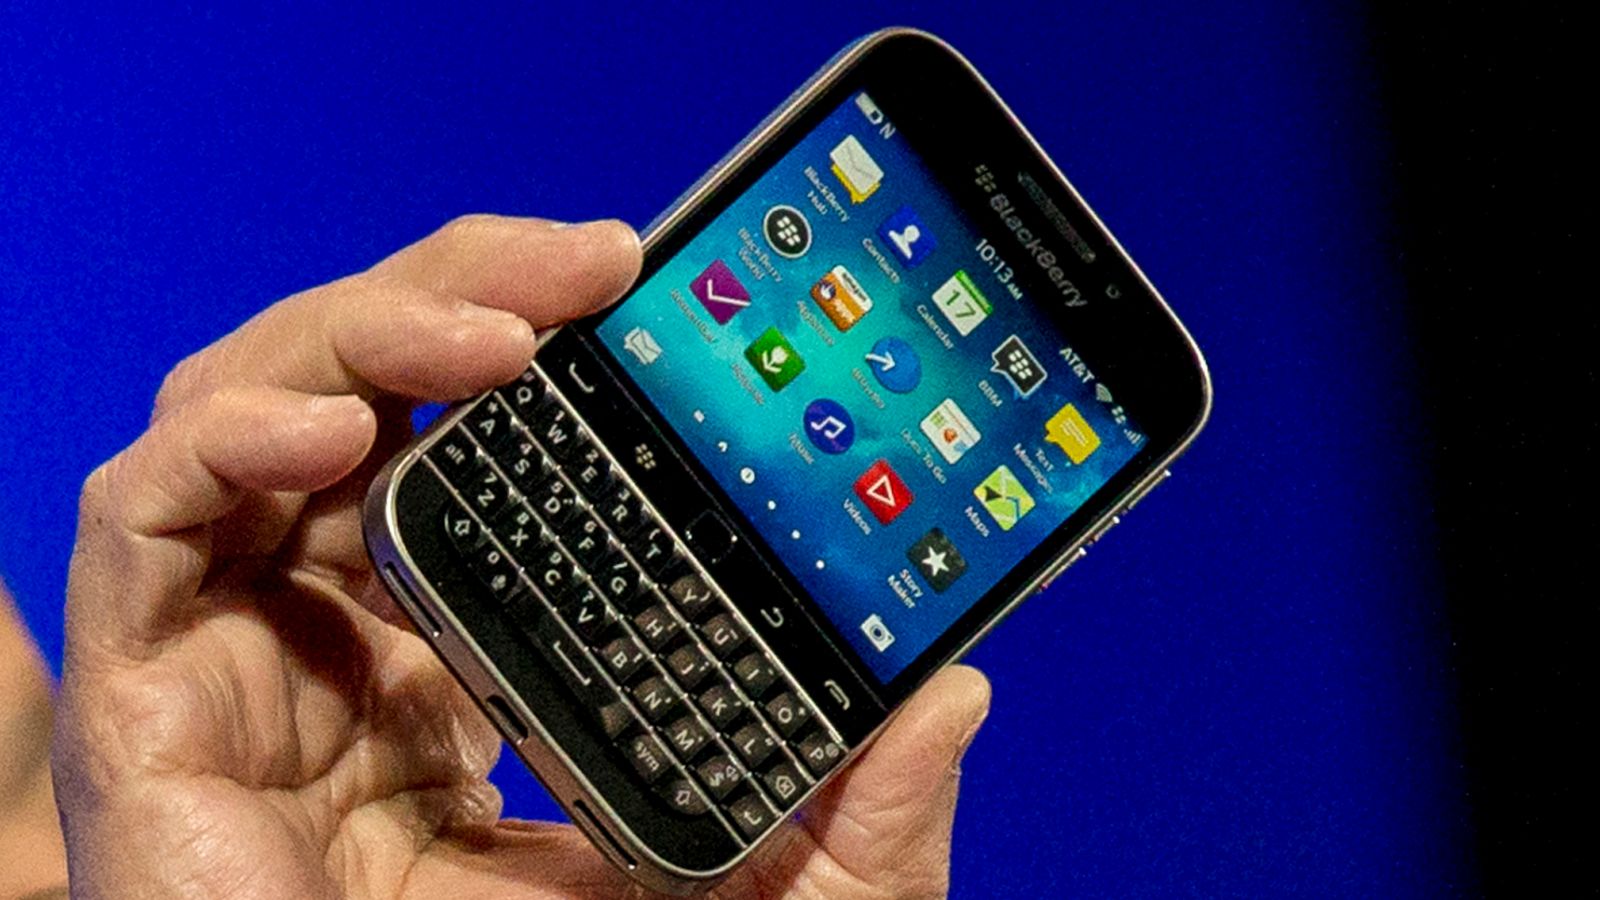 End of an era Today is last day BlackBerry phones will ever work